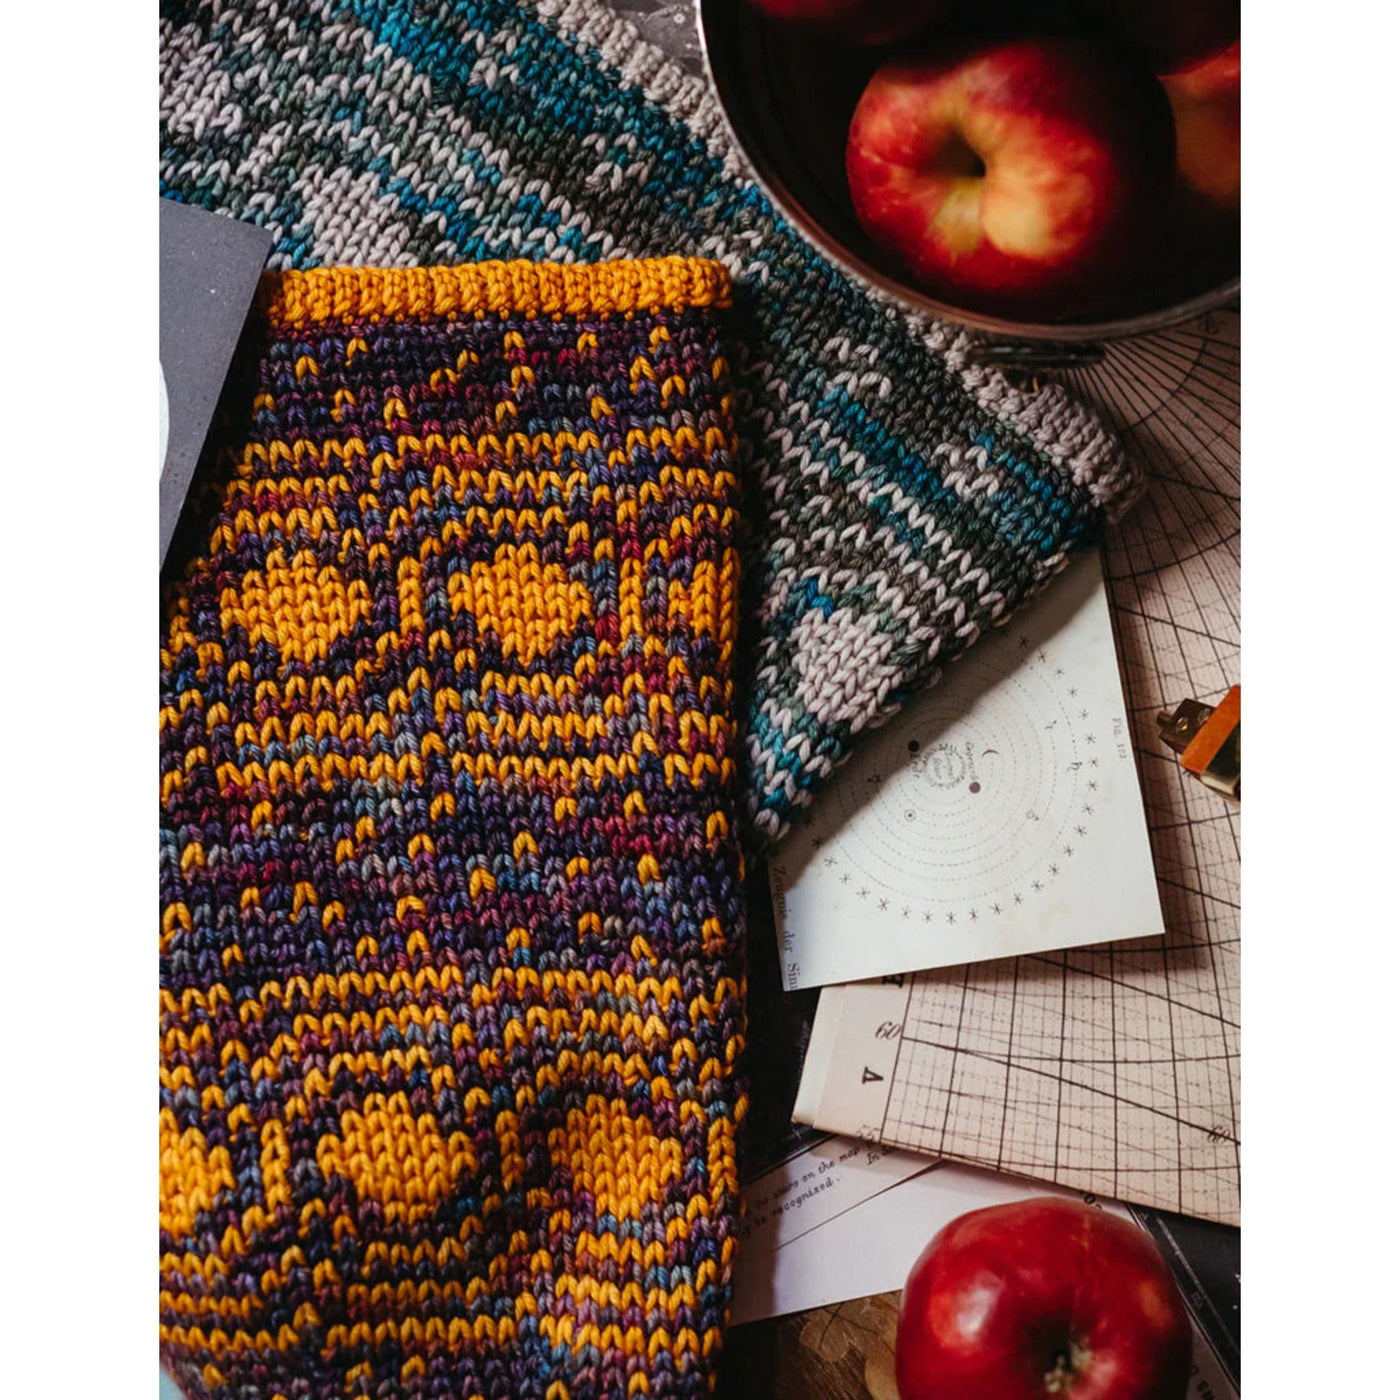 Colorful cowls (pattern Cosmic Cowls) lying on workspace- pattern found in Moorit Magazine Issue 3 - Cosmic.